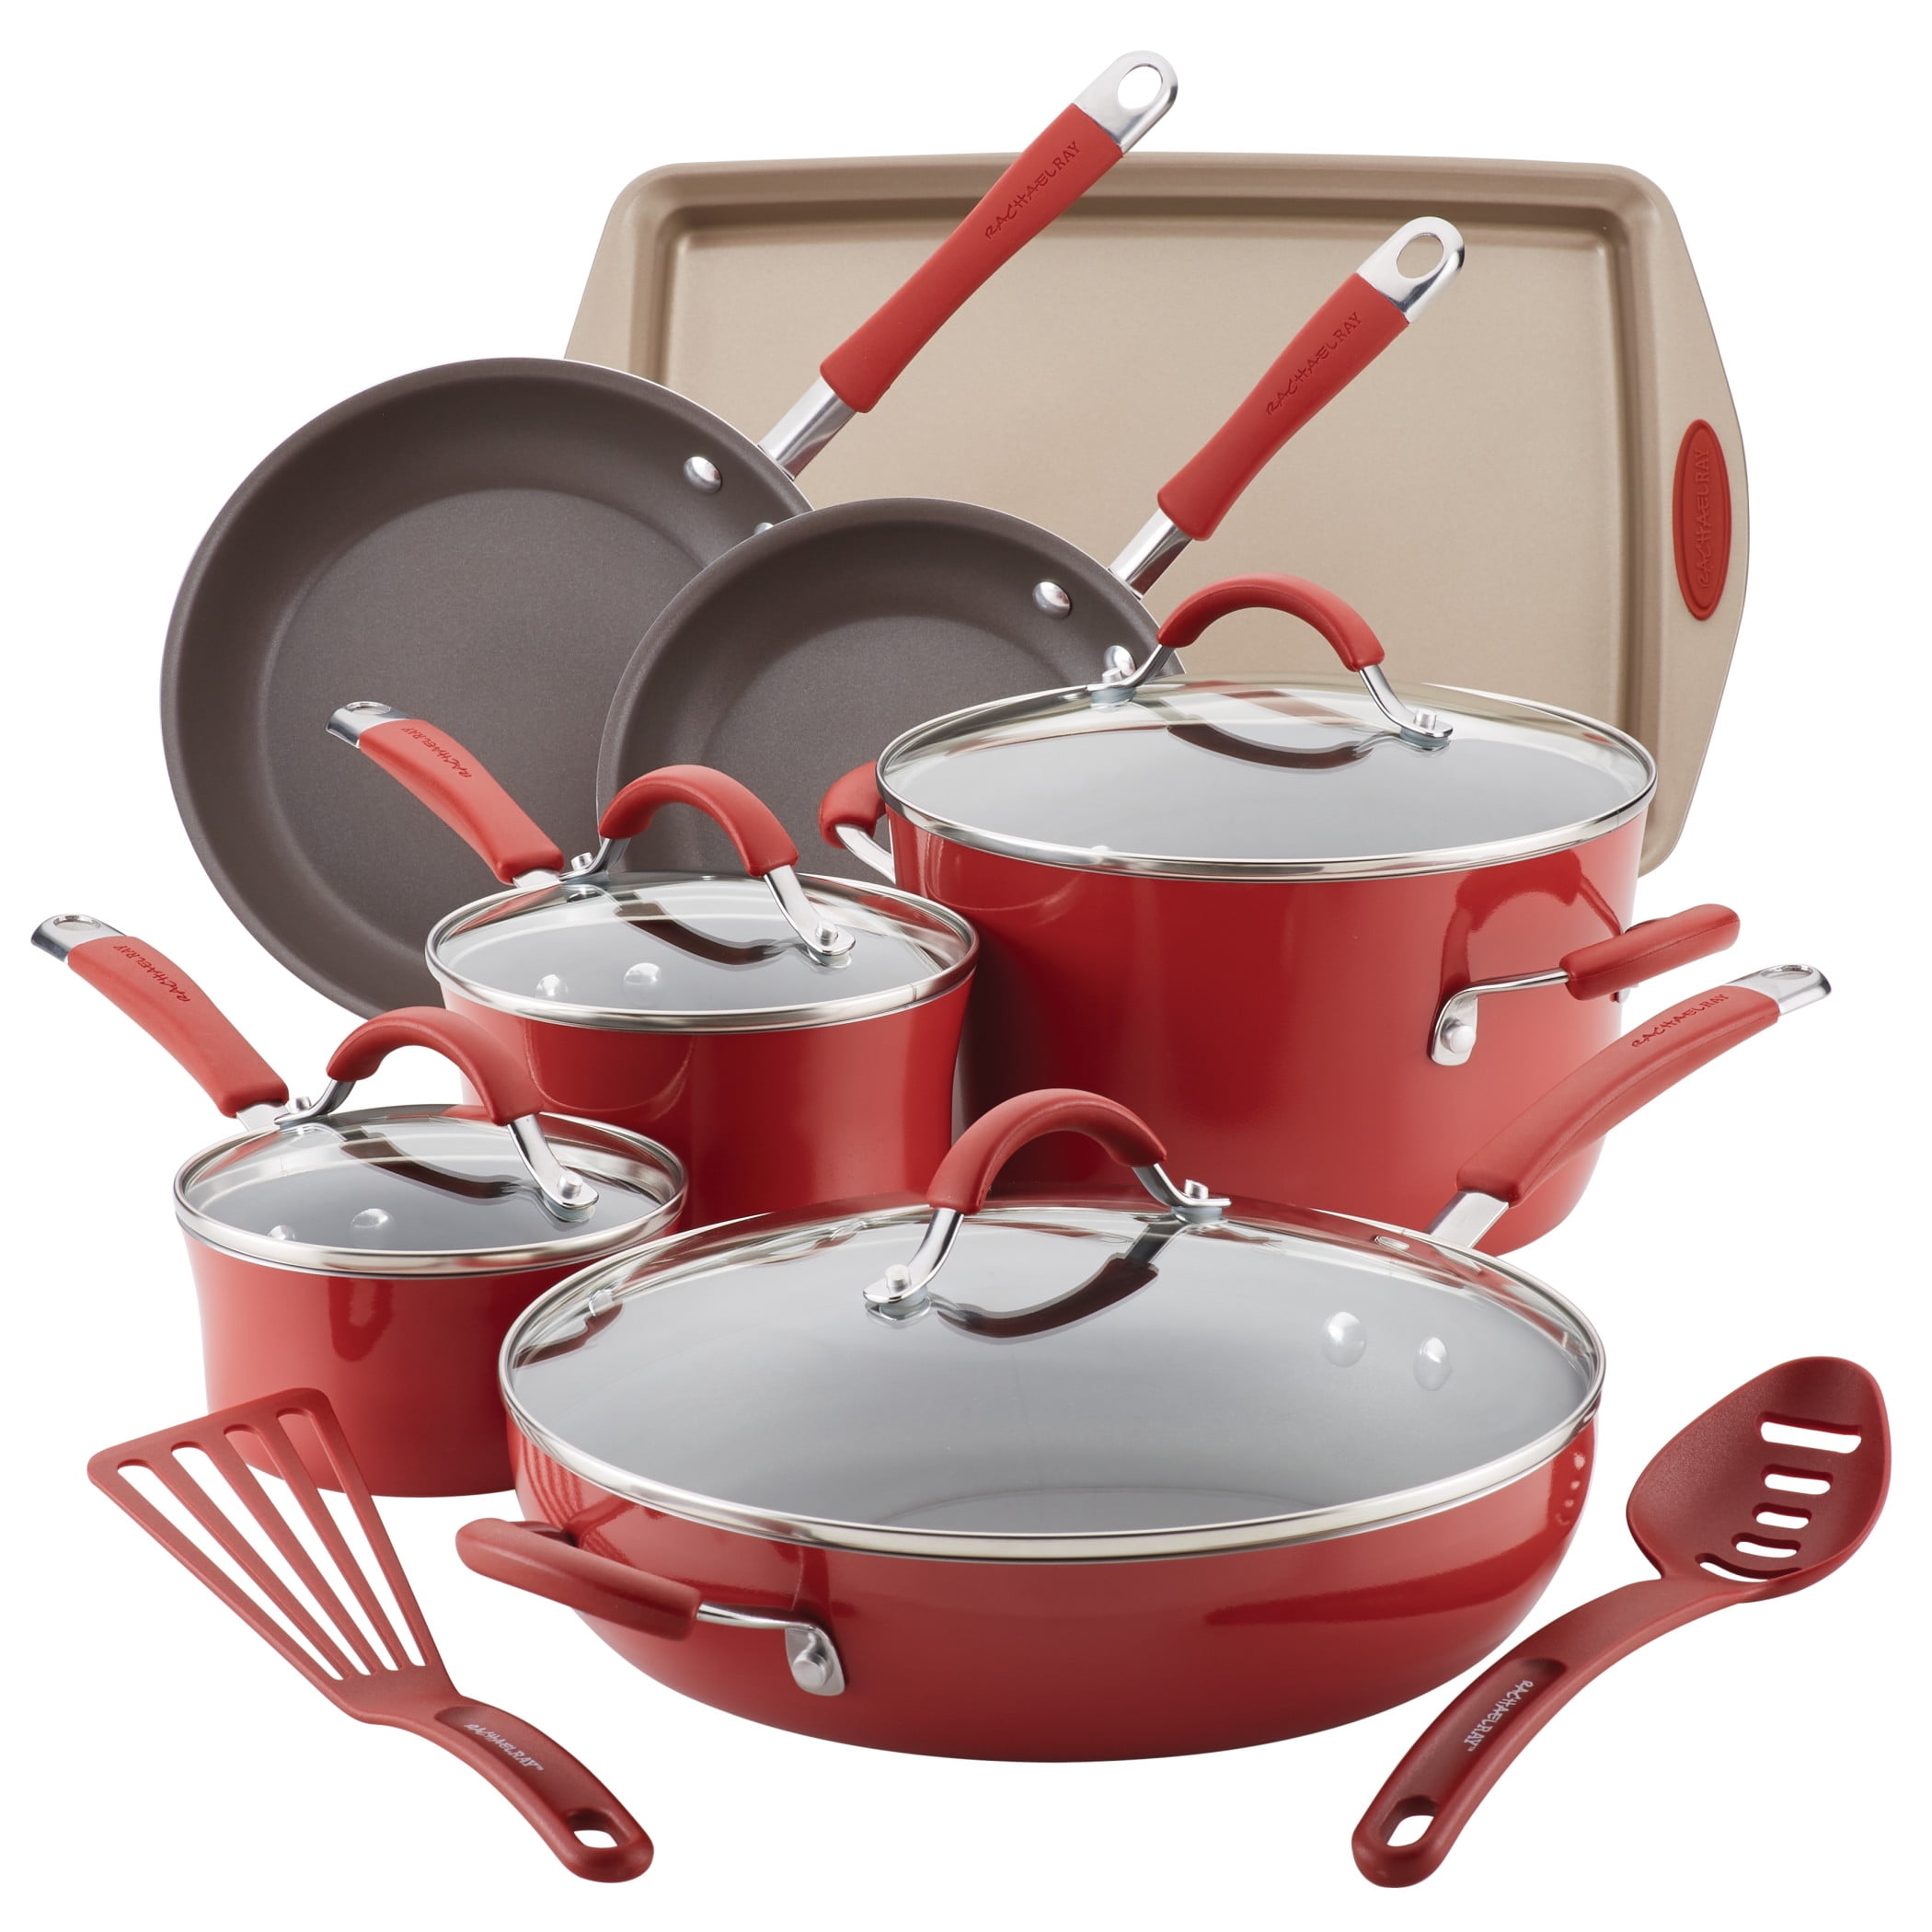 Non-Stick Cookware Set, Marble, 13Pieces, Red, Kochstelle  Cookware and  bakeware, Cookware set, Ceramic cookware set